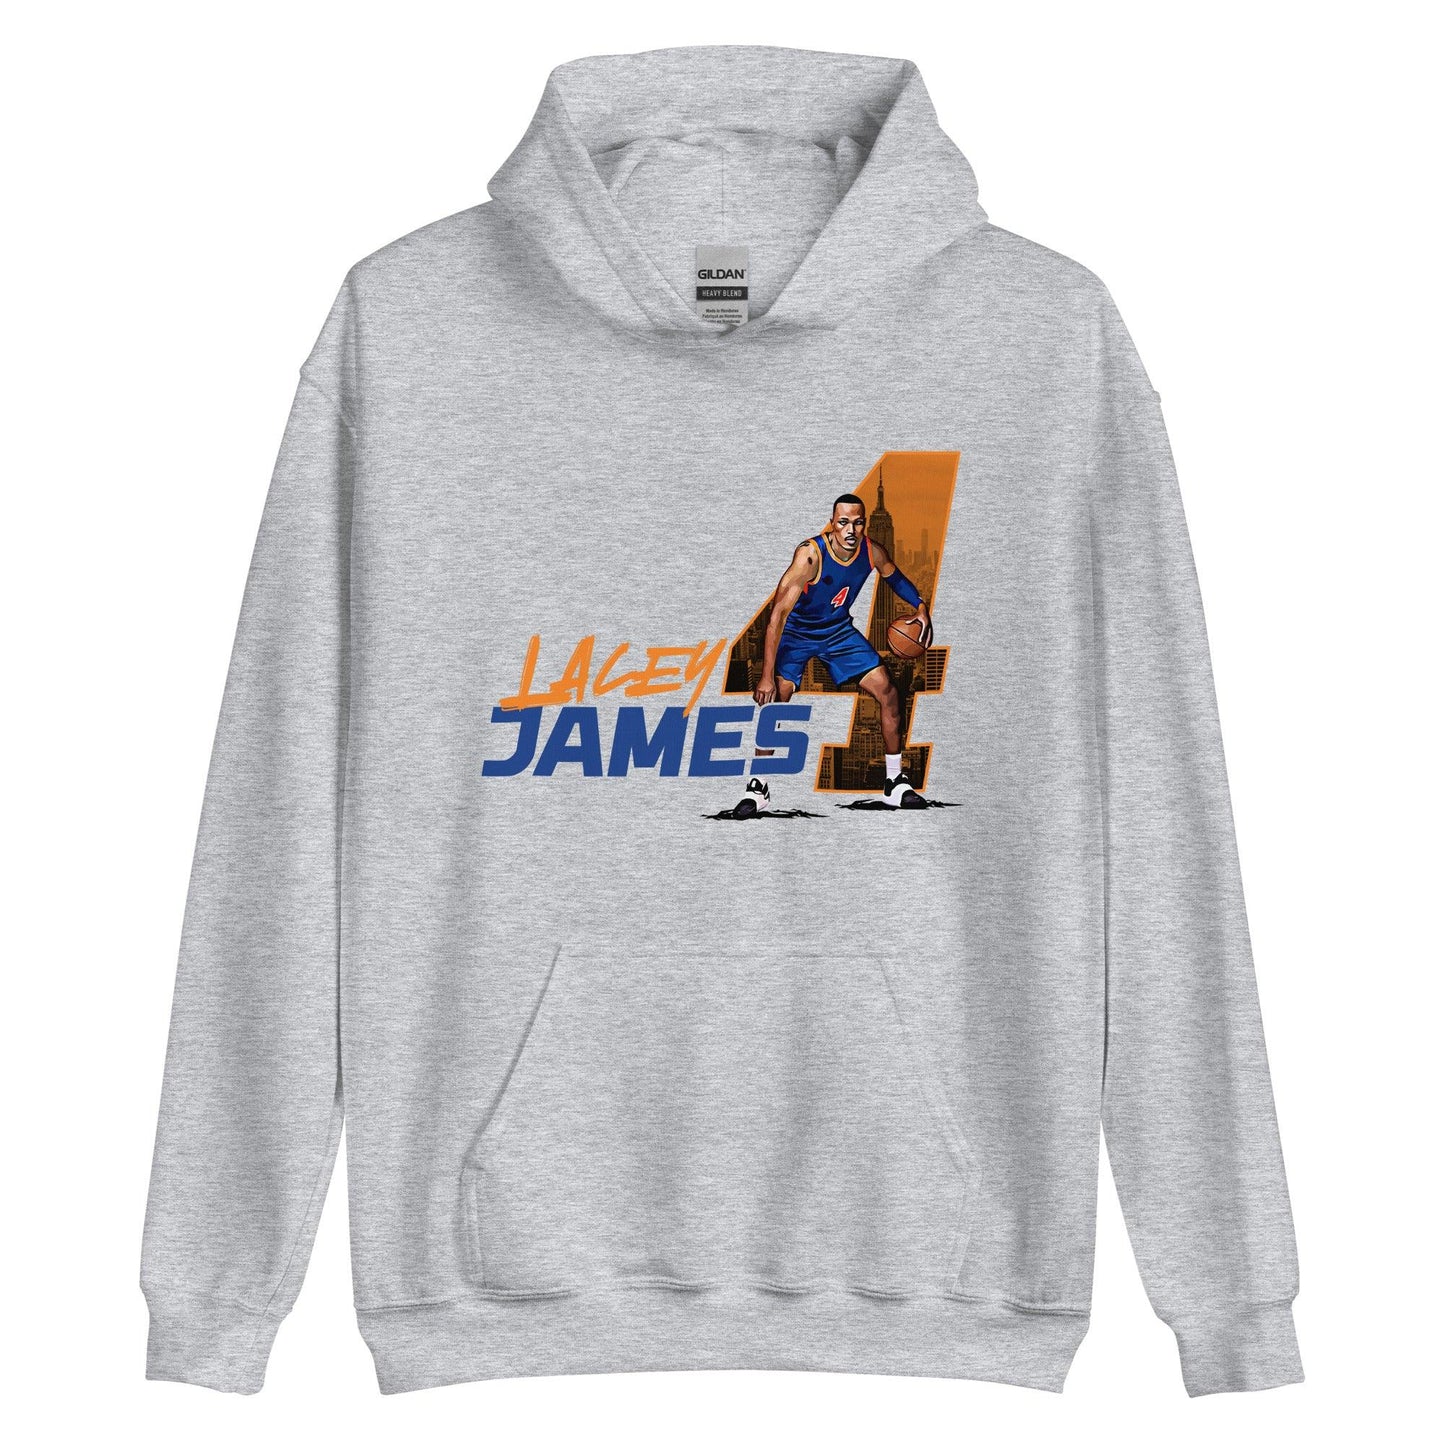 Lacey James "Gameday" Hoodie - Fan Arch